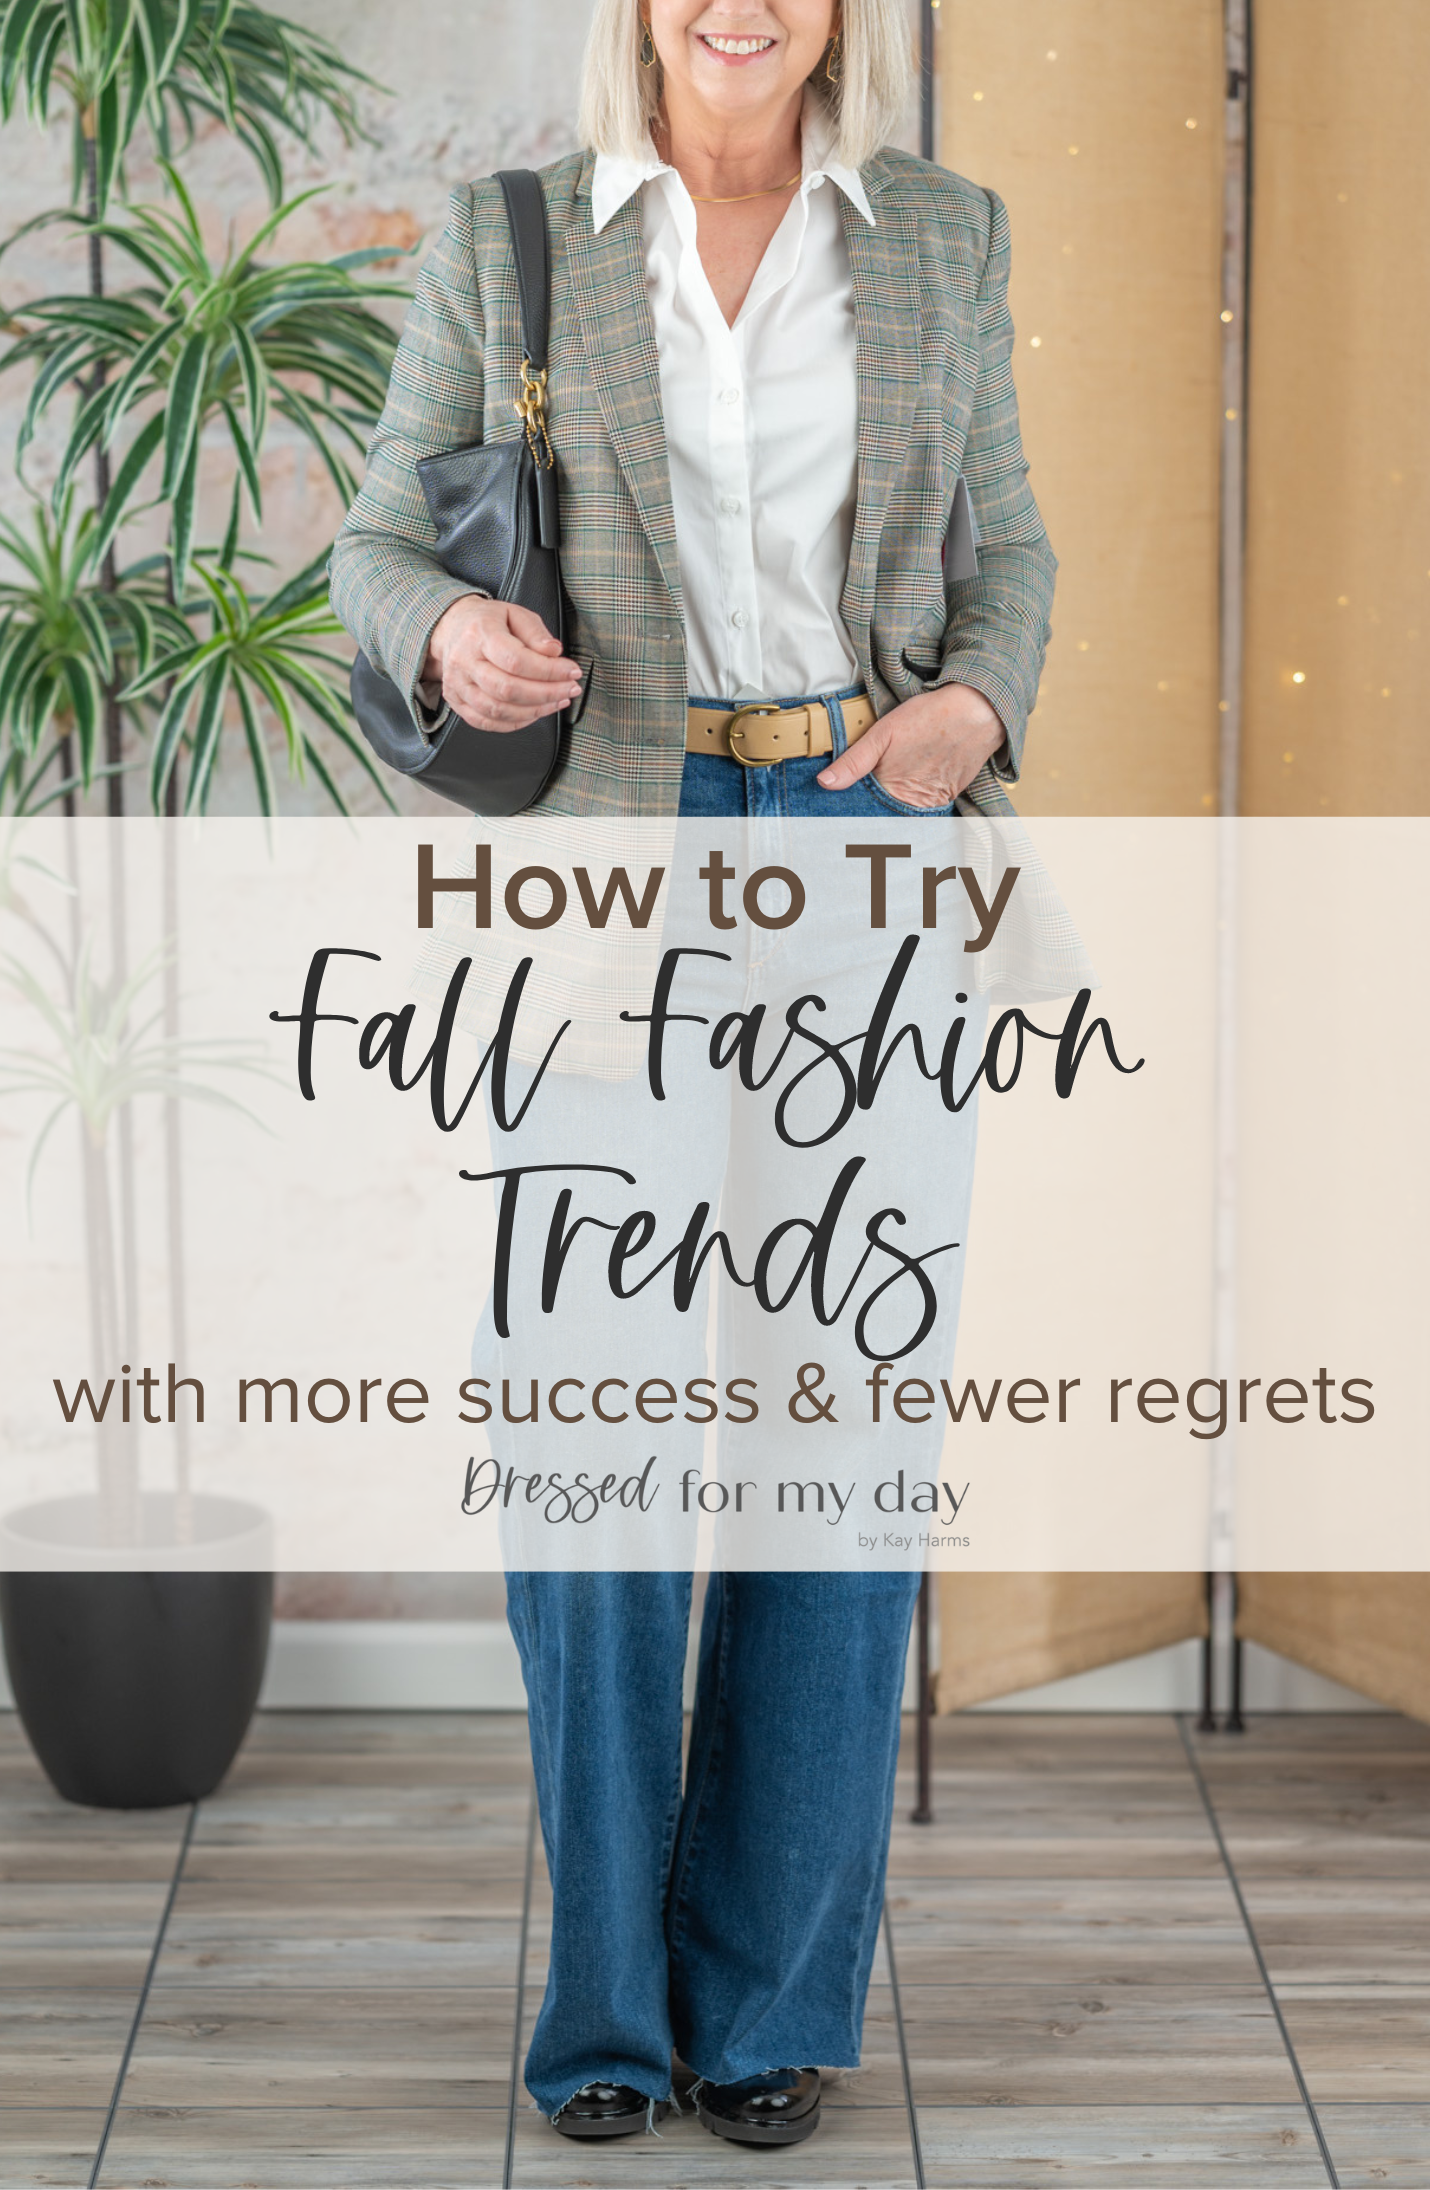 Over 50 Fall Fashion Trends 2020 - Cindy Hattersley Design